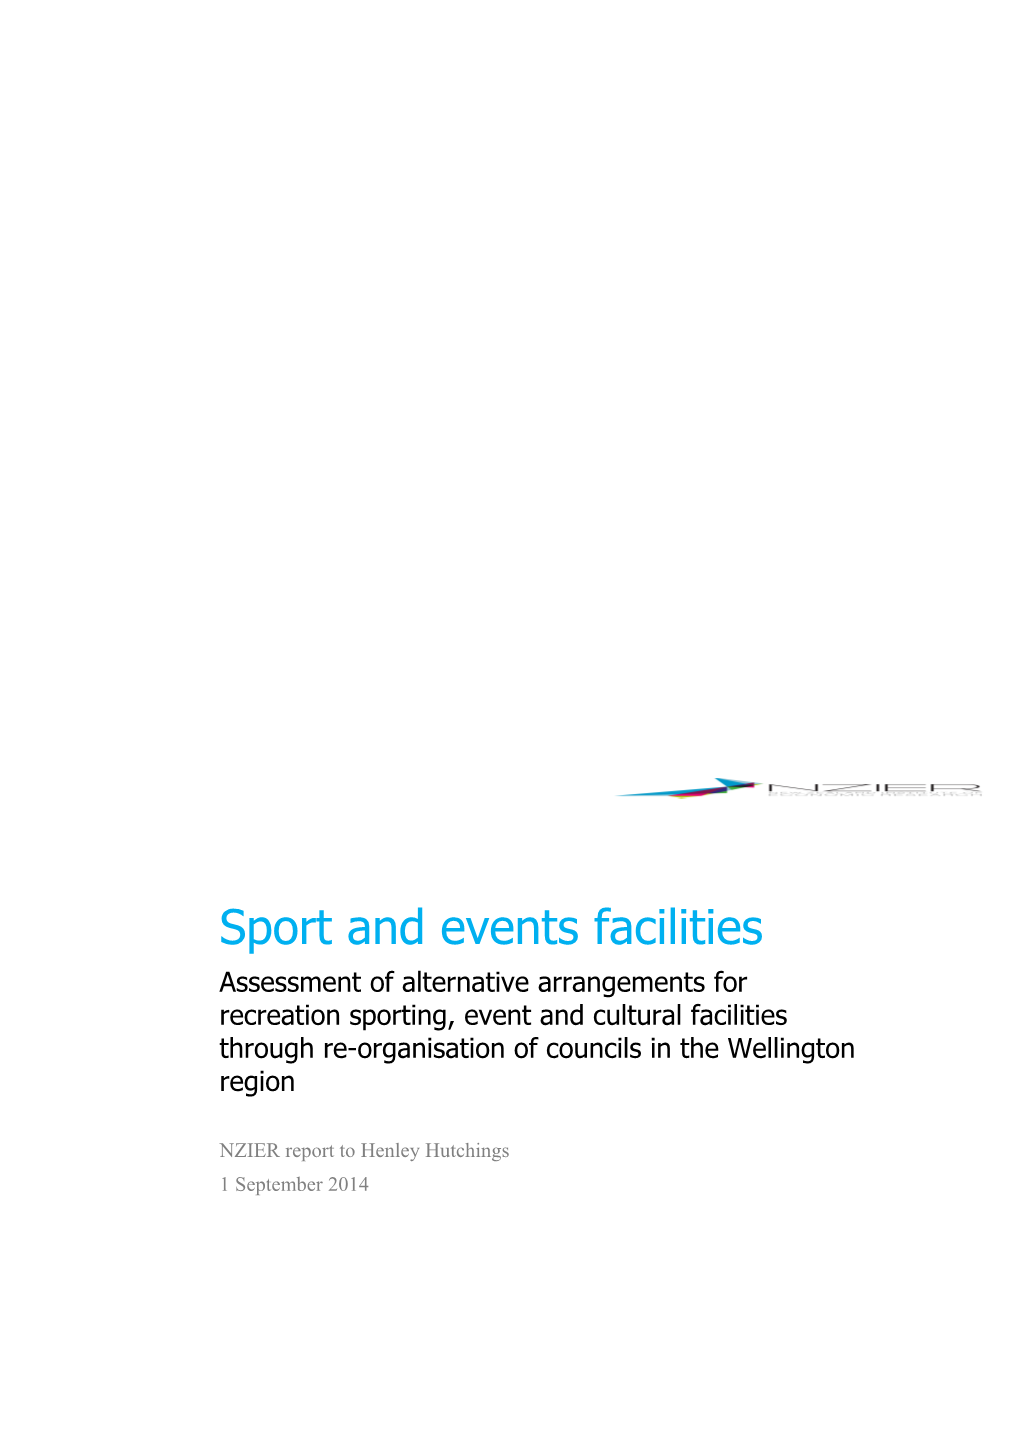 Sport and Events Facilities